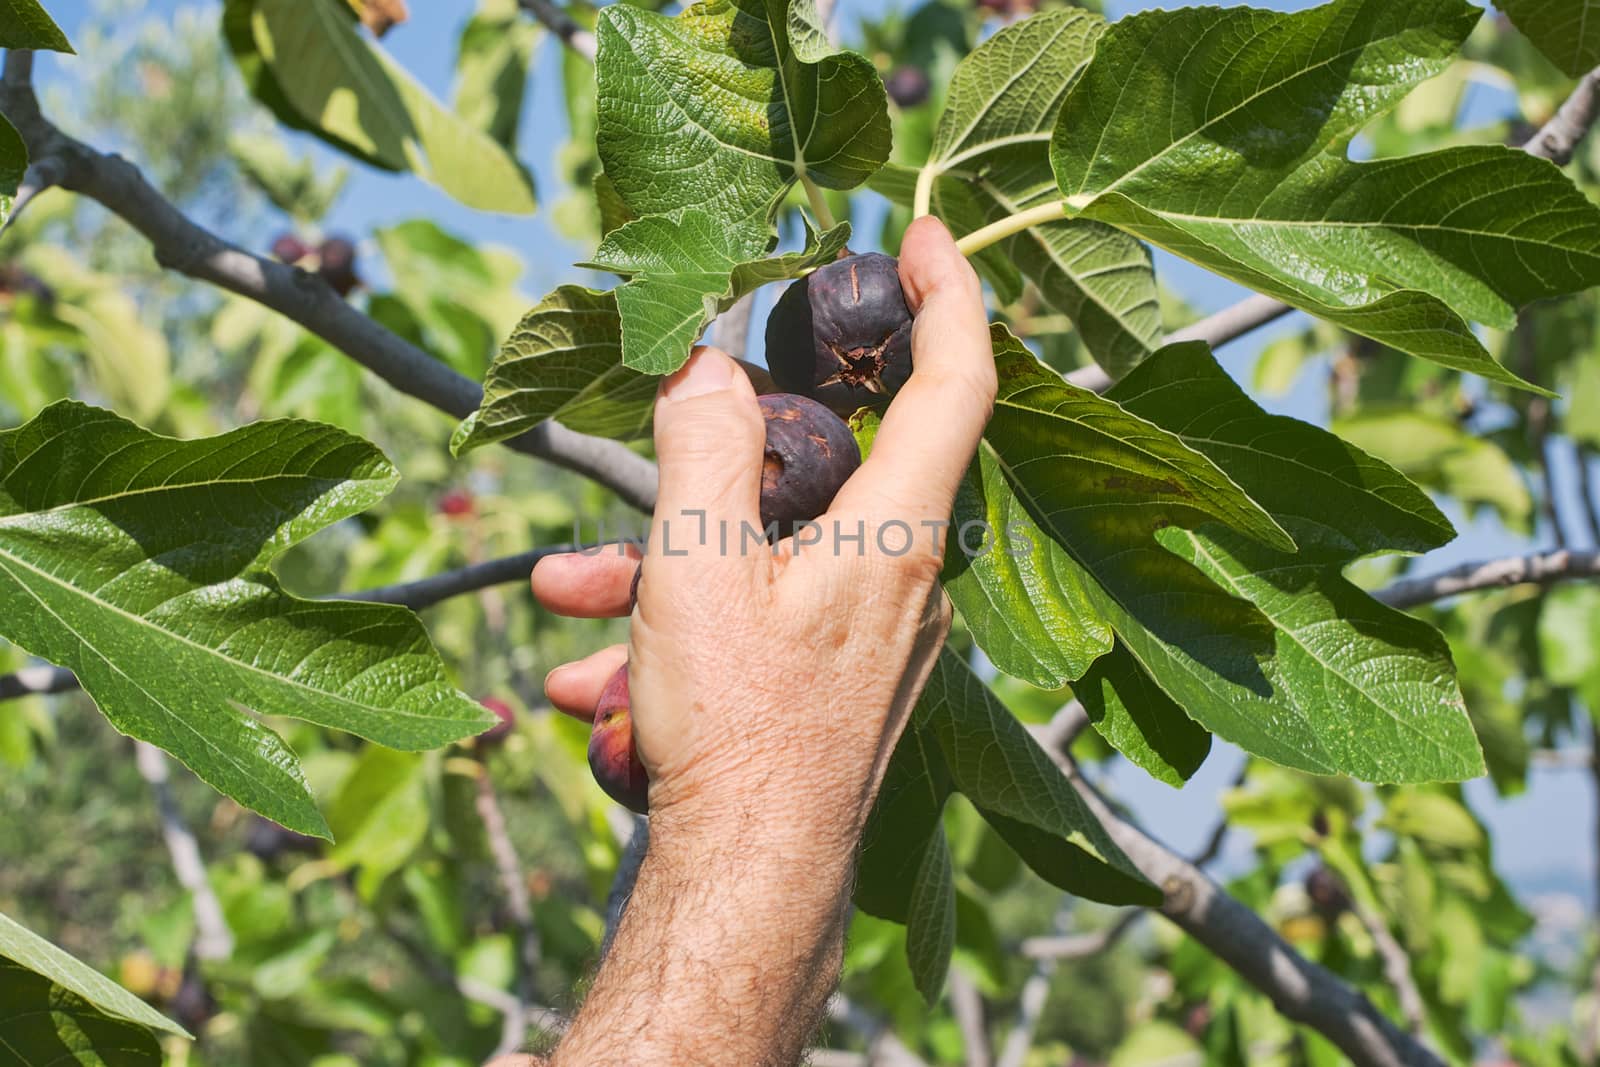 Hand of a farmer collecting figs from a tree in a garden